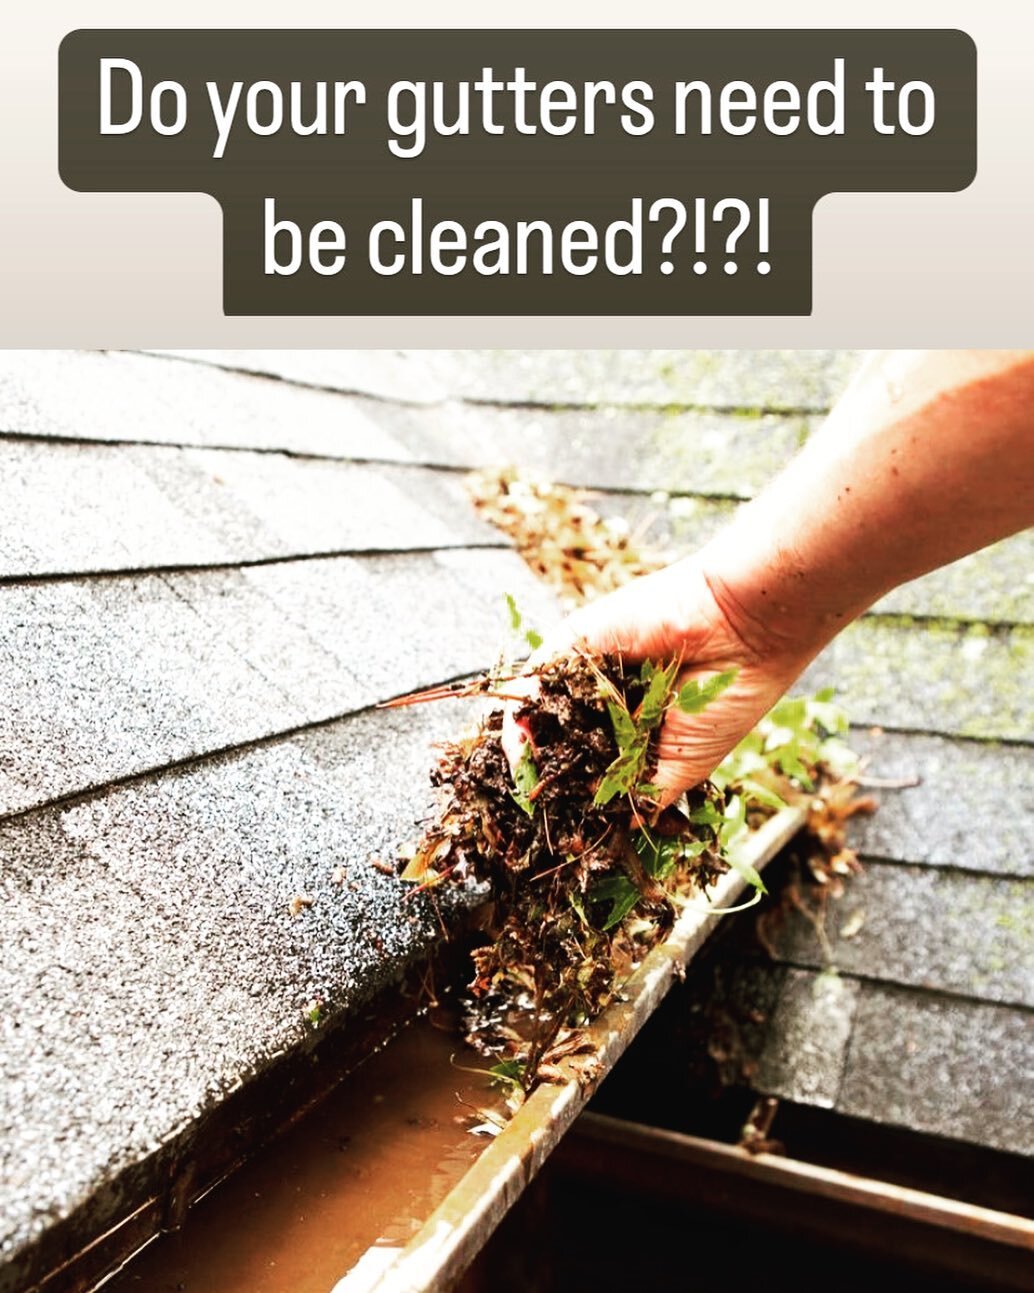 Open time slot for a gutter/downspout cleaning today! Give us a call at 530.921.0309 ☎️☎️☎️